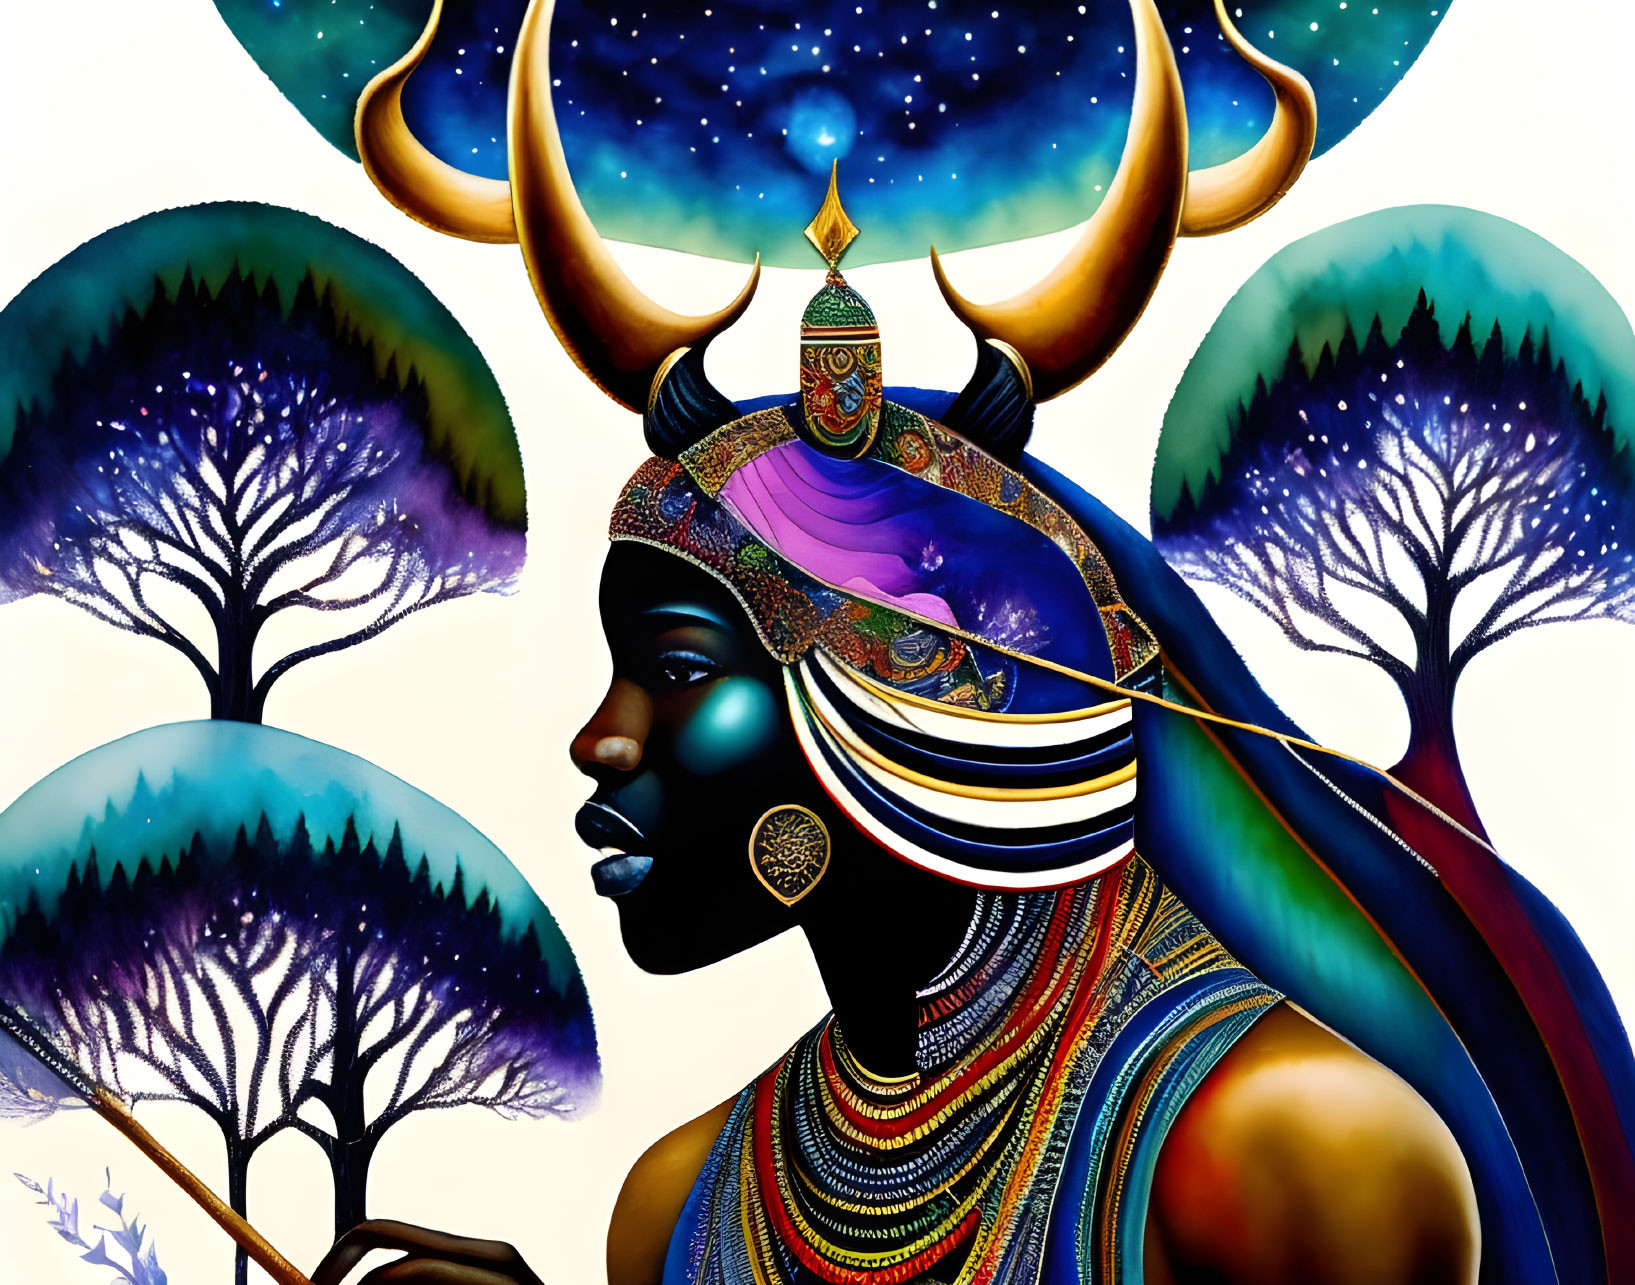 Person with Elaborate Horned Headgear in Cosmic Landscape